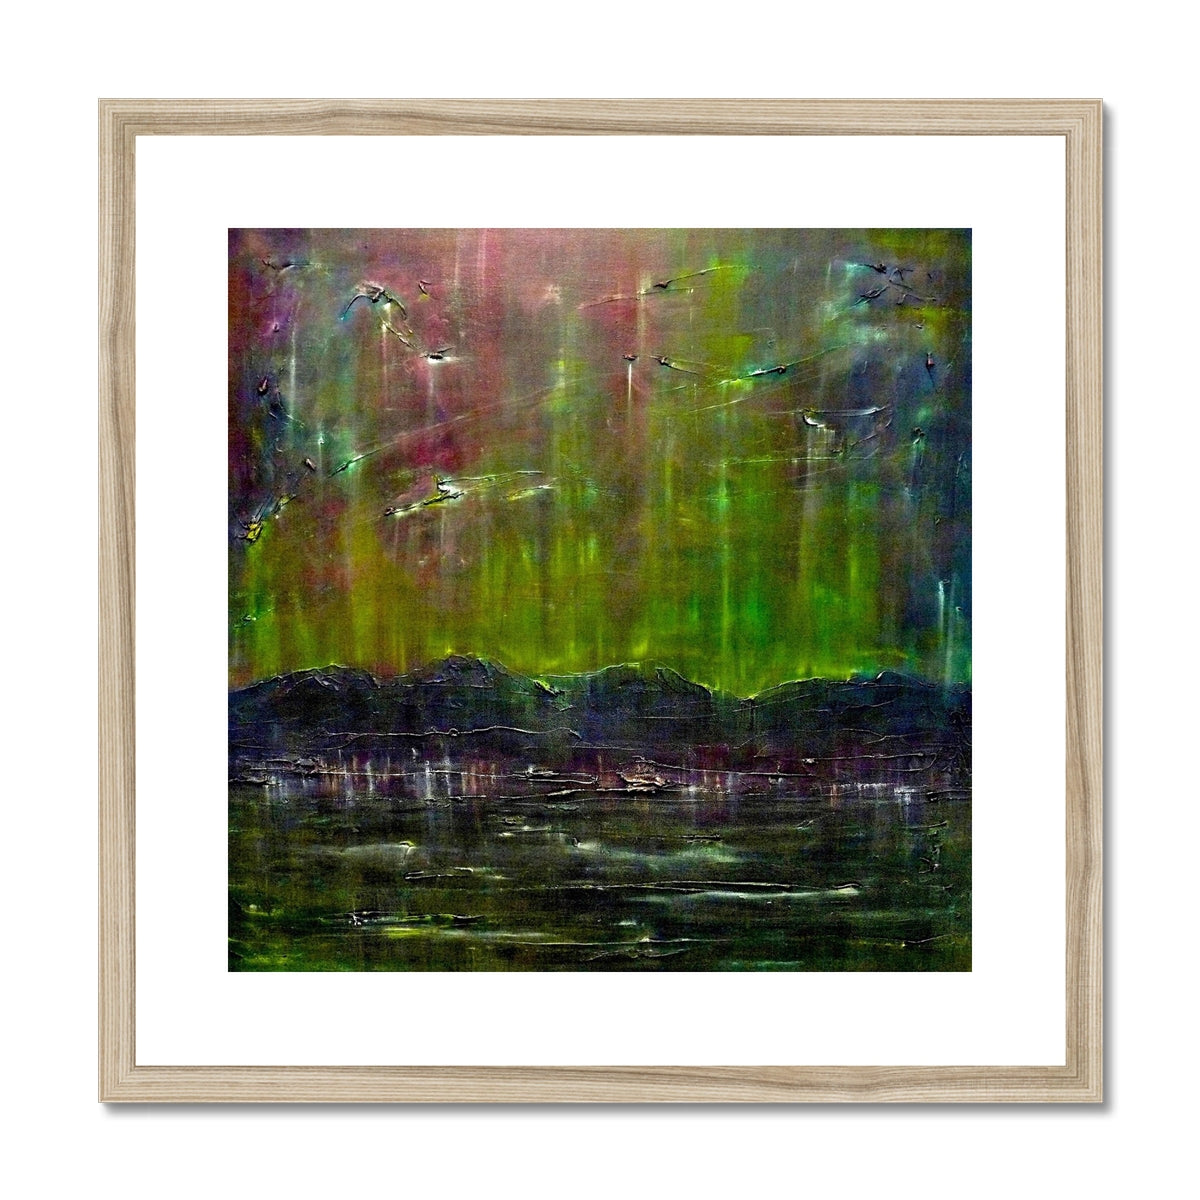 Cromarty Harbour Northern Lights Painting | Framed & Mounted Prints From Scotland-Framed & Mounted Prints-Scottish Highlands & Lowlands Art Gallery-20"x20"-Natural Frame-Paintings, Prints, Homeware, Art Gifts From Scotland By Scottish Artist Kevin Hunter